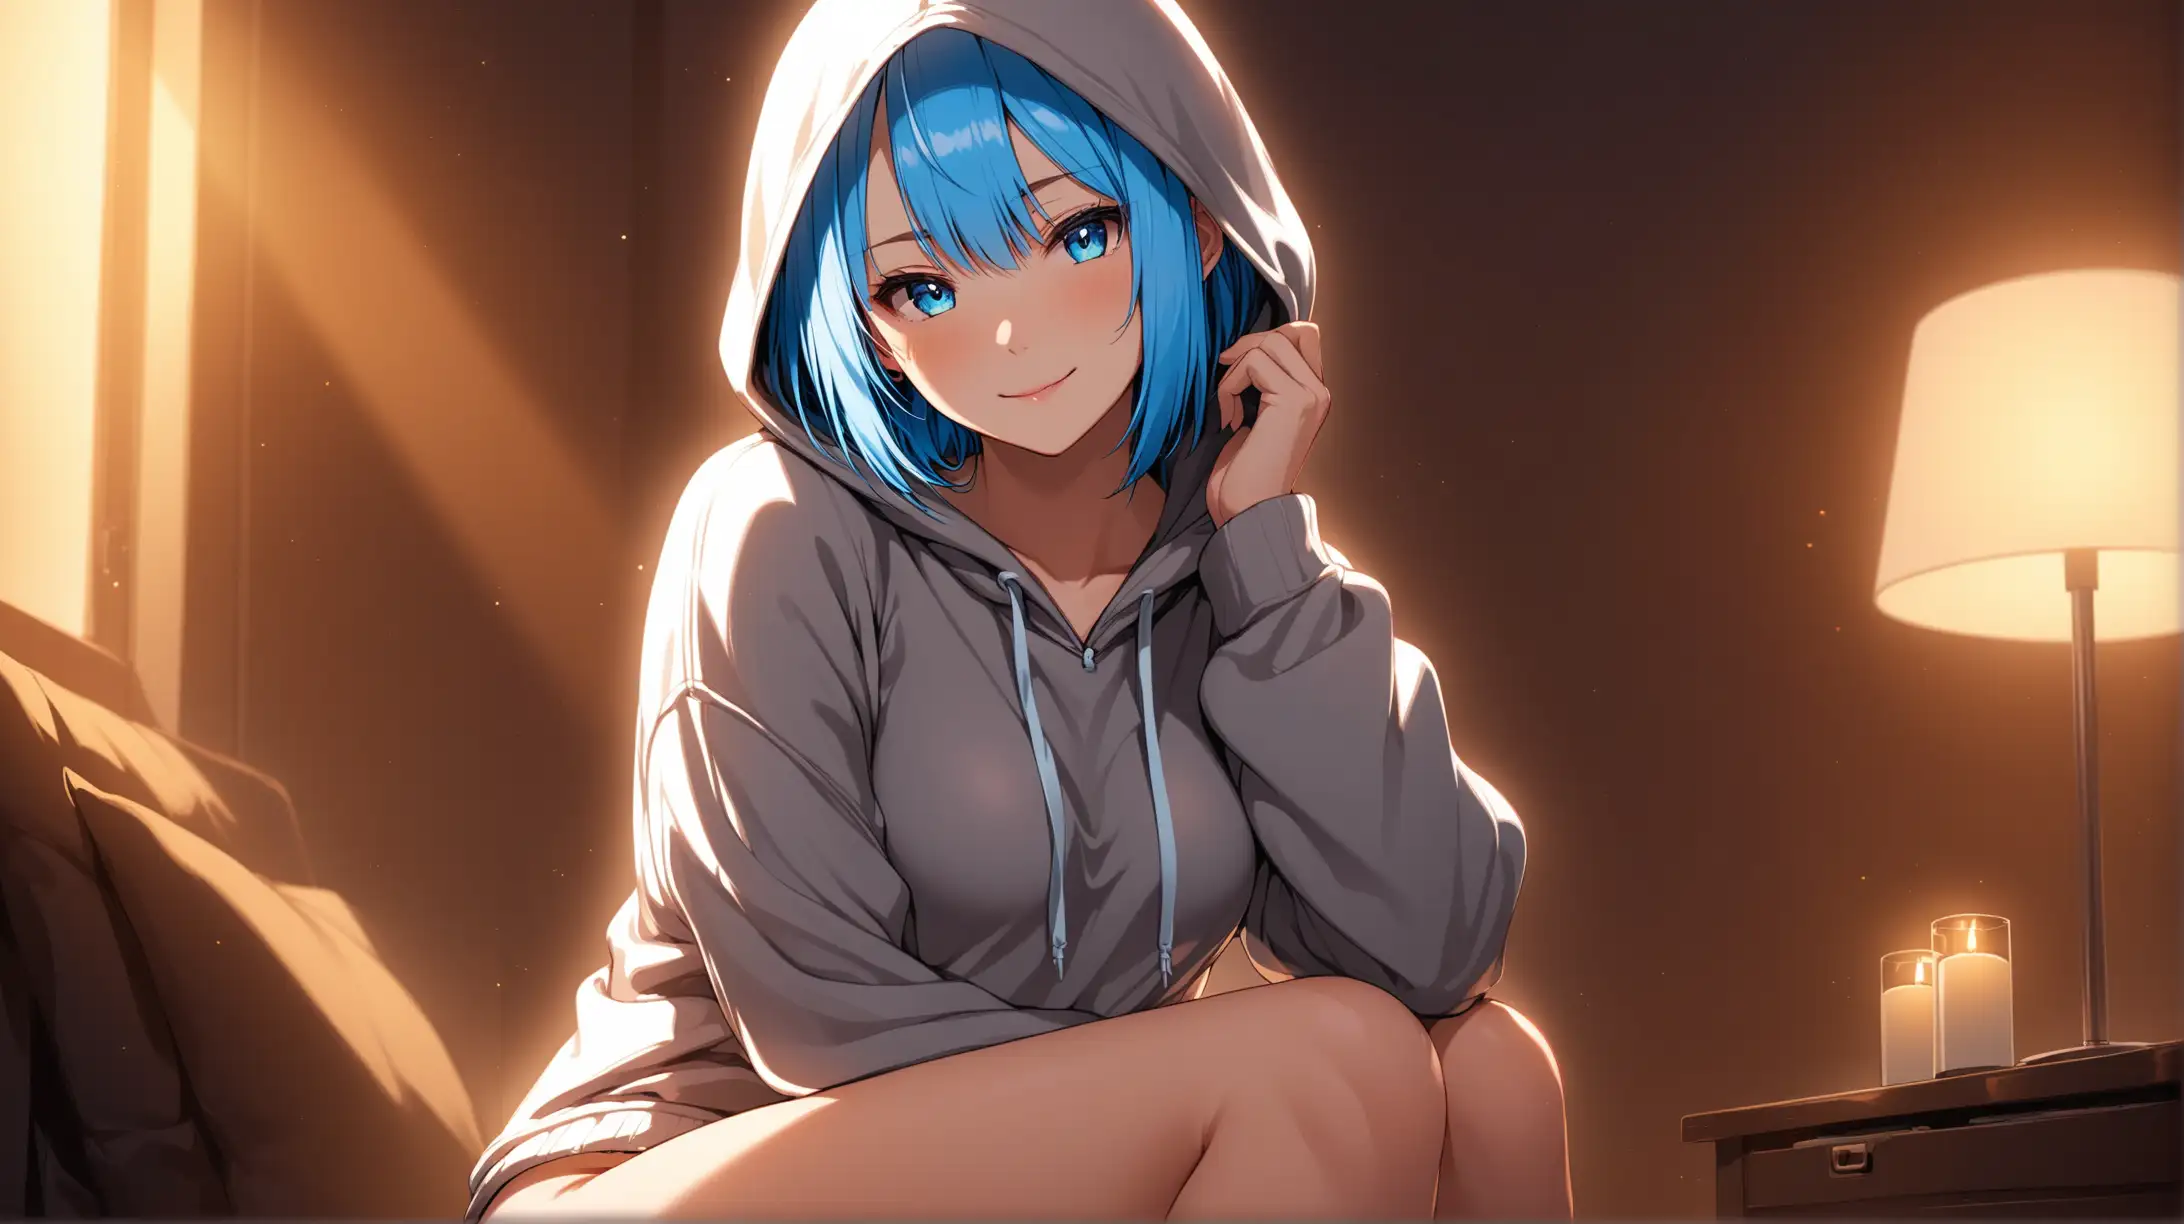 Seductive Rem Smiling in Hoodie High Quality Ambient Lighting Artwork